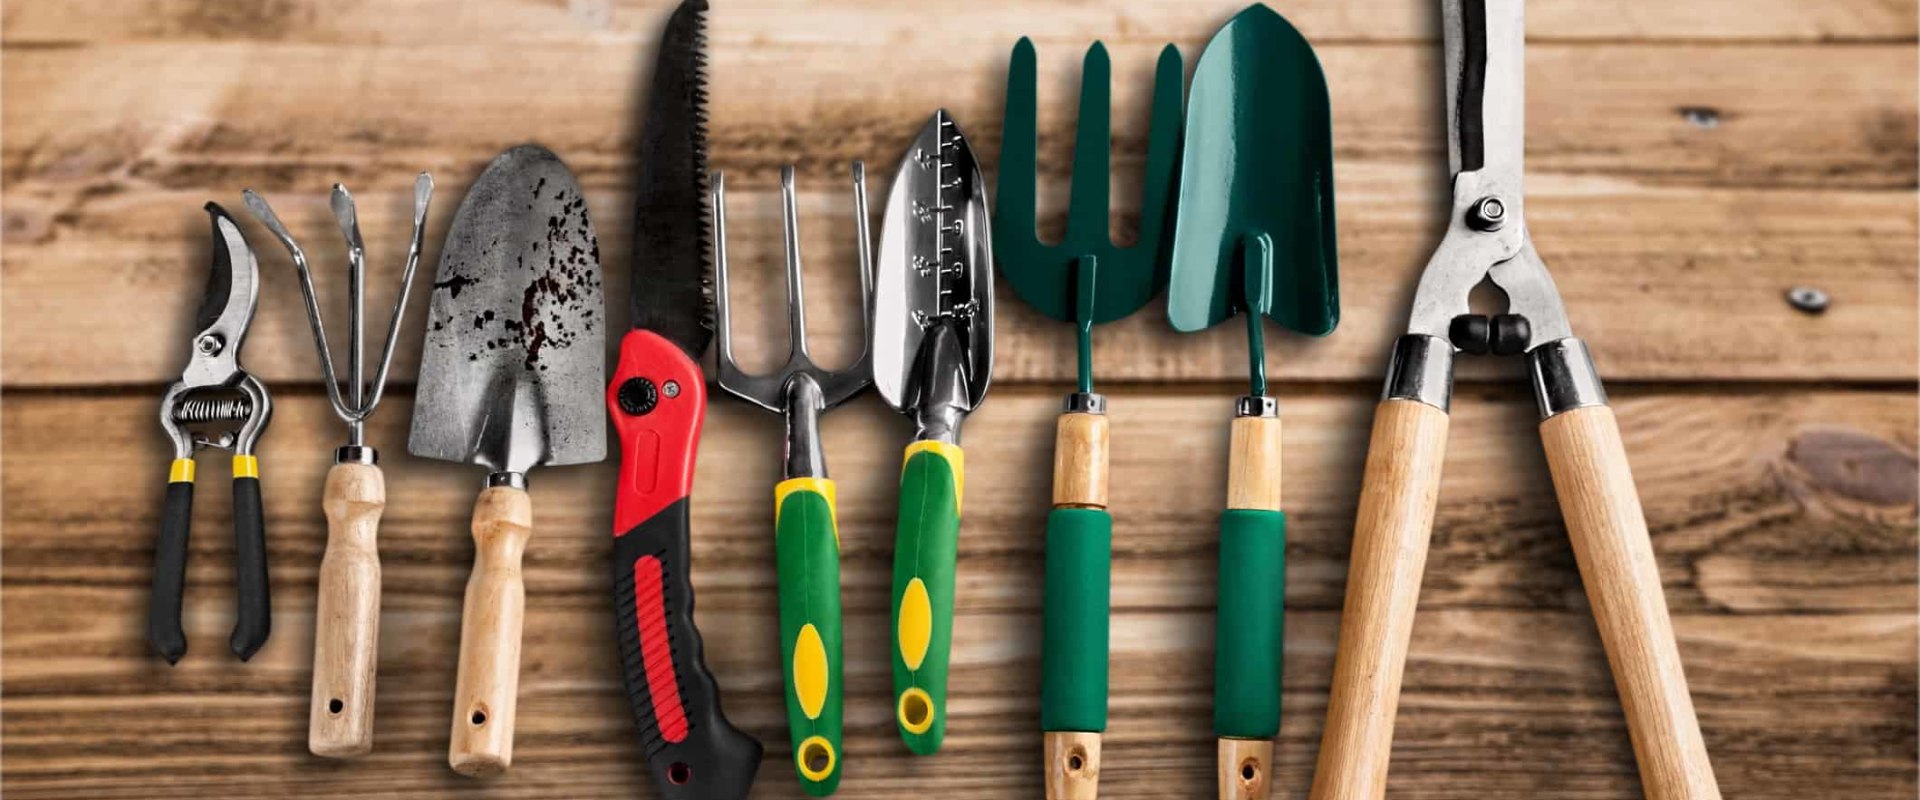 What are the best hand tools for the money?